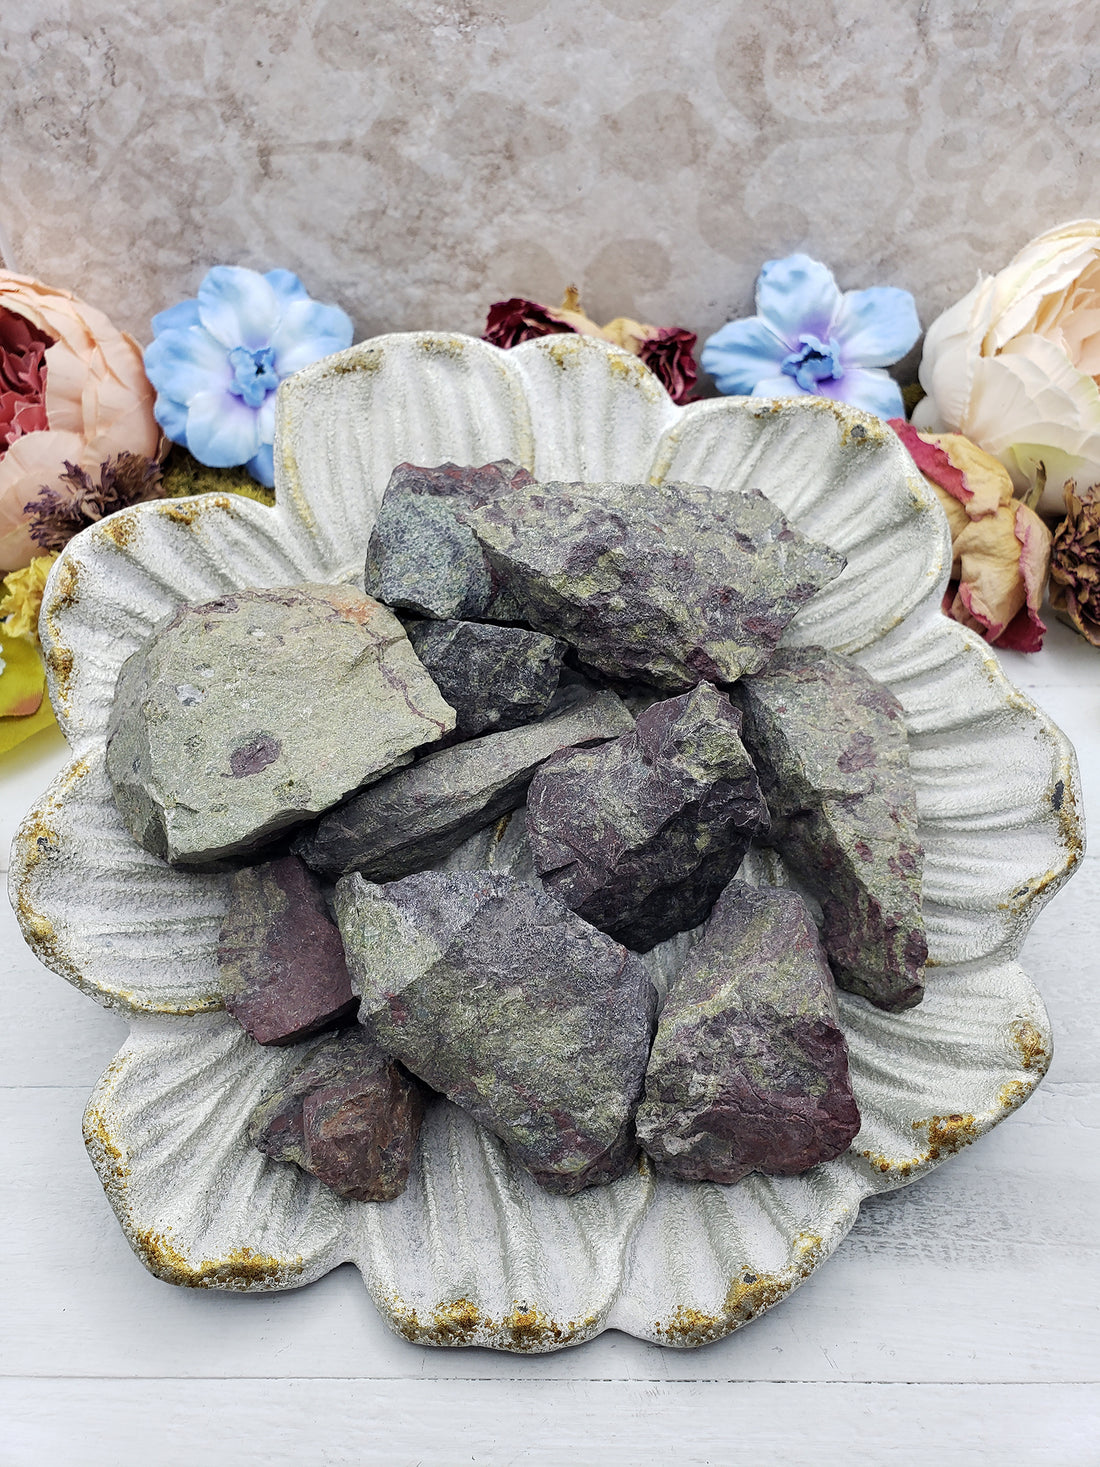 rough dragon stone pieces on floral display dish